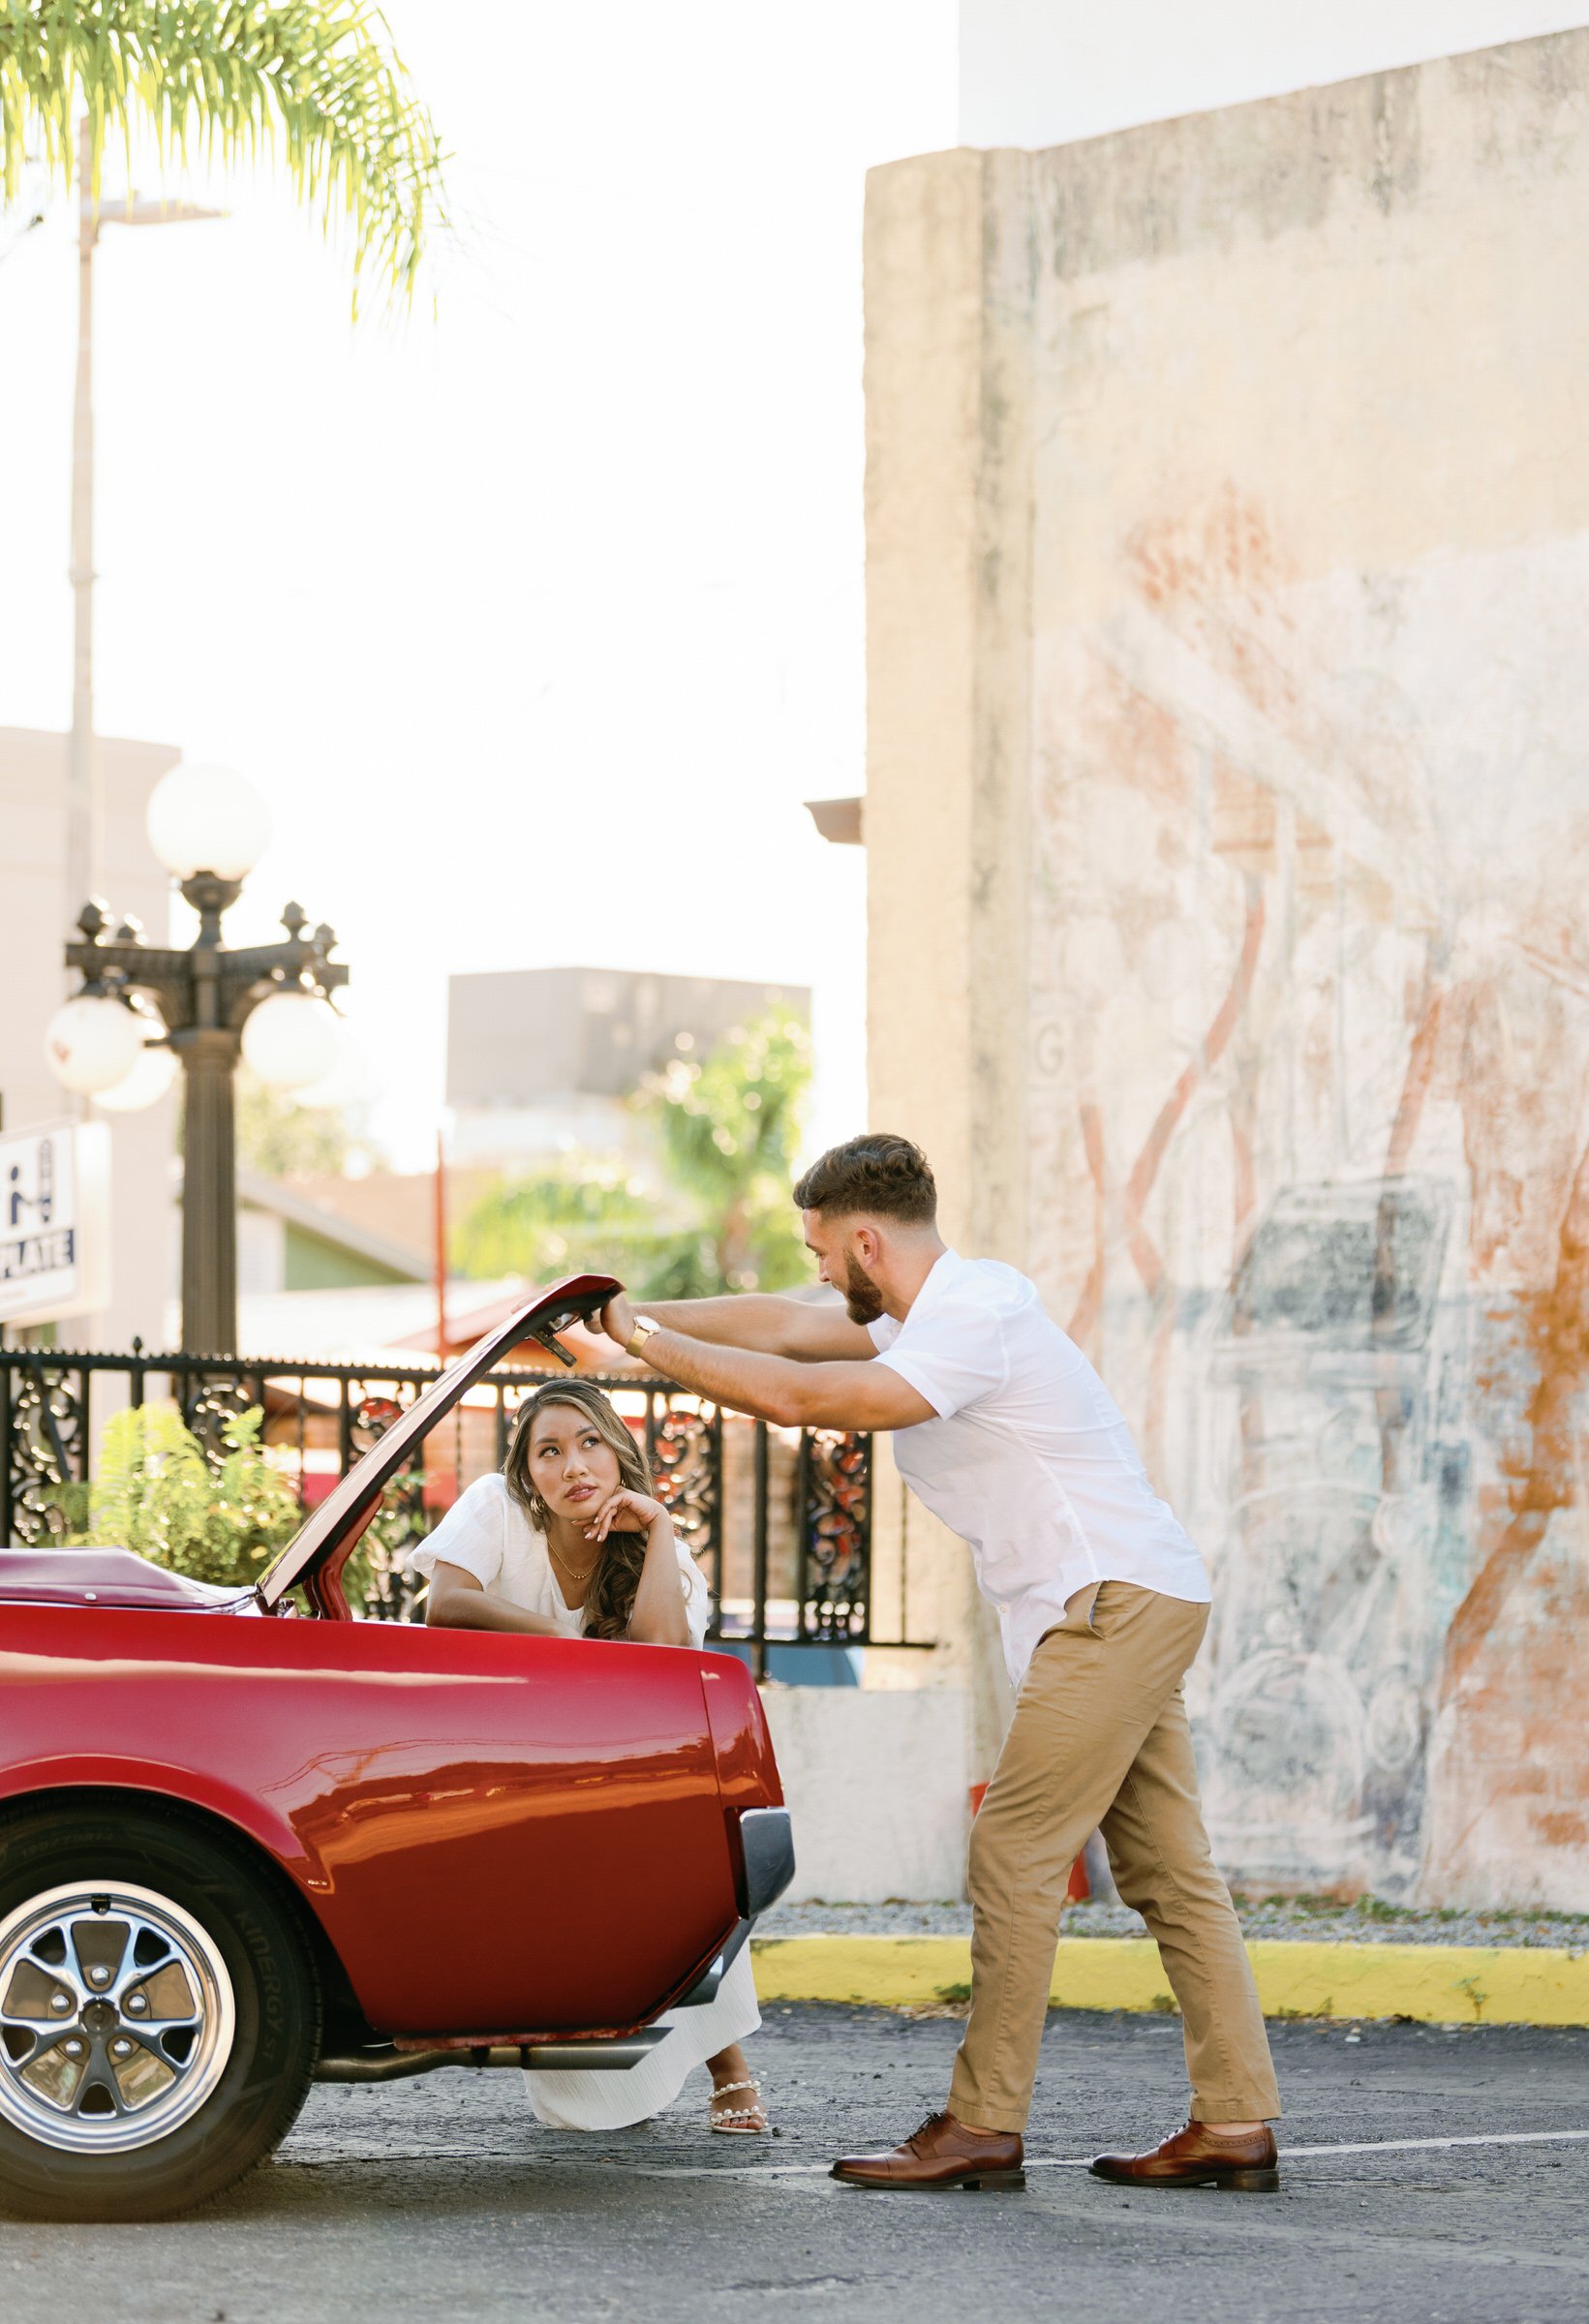 Copyright-Dewitt-for-Love-Photography-M-M-Ybor-City-Tampa-Engagement-Session-16.jpg